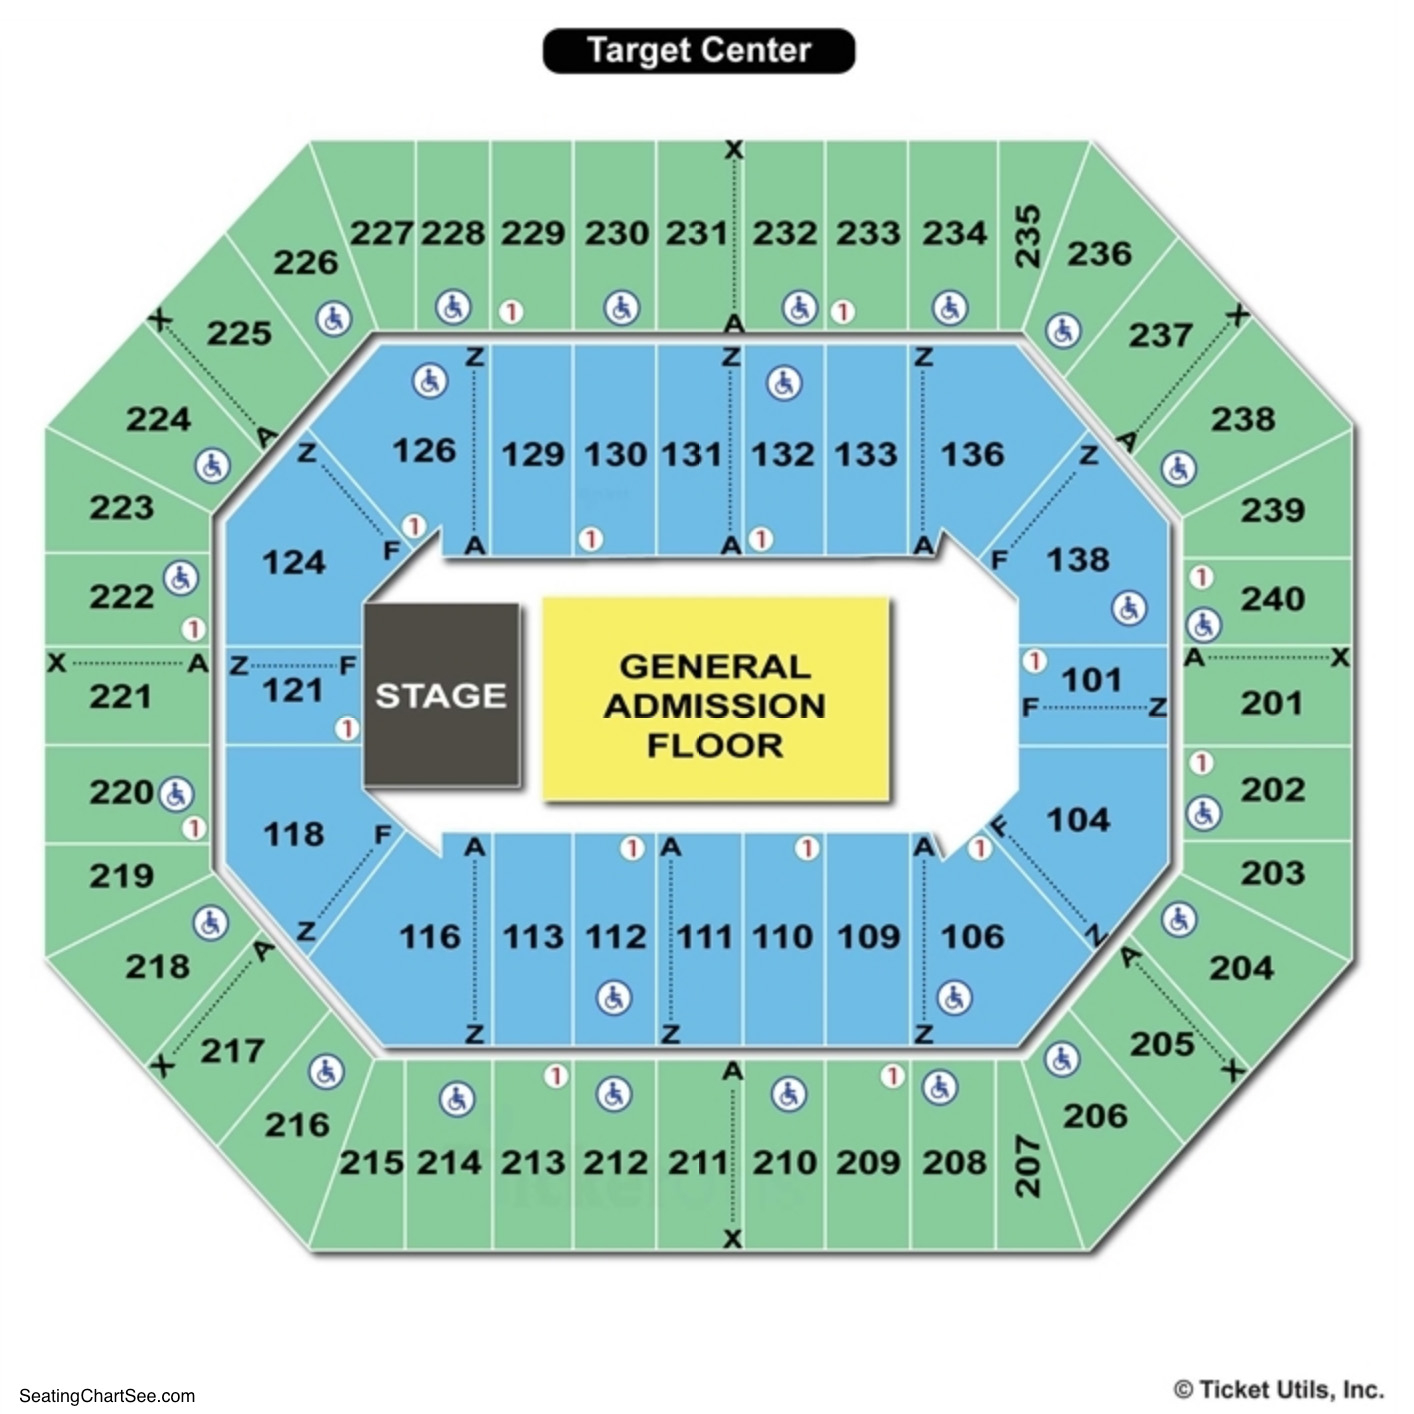 Seating Chart Target Center Center Seating Chart